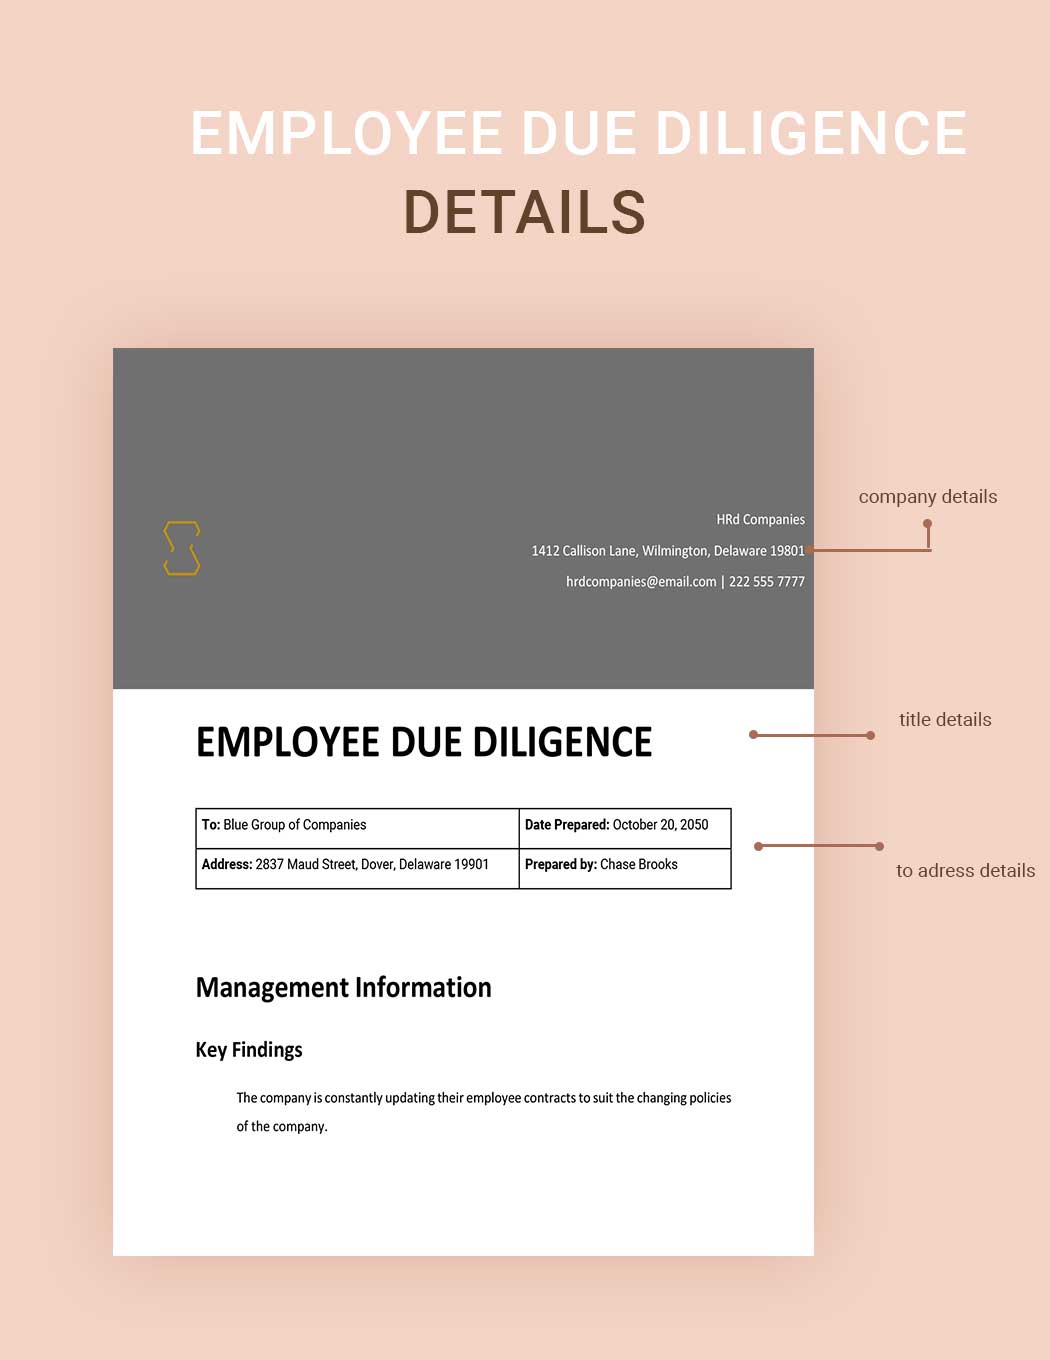 Employee Due Diligence